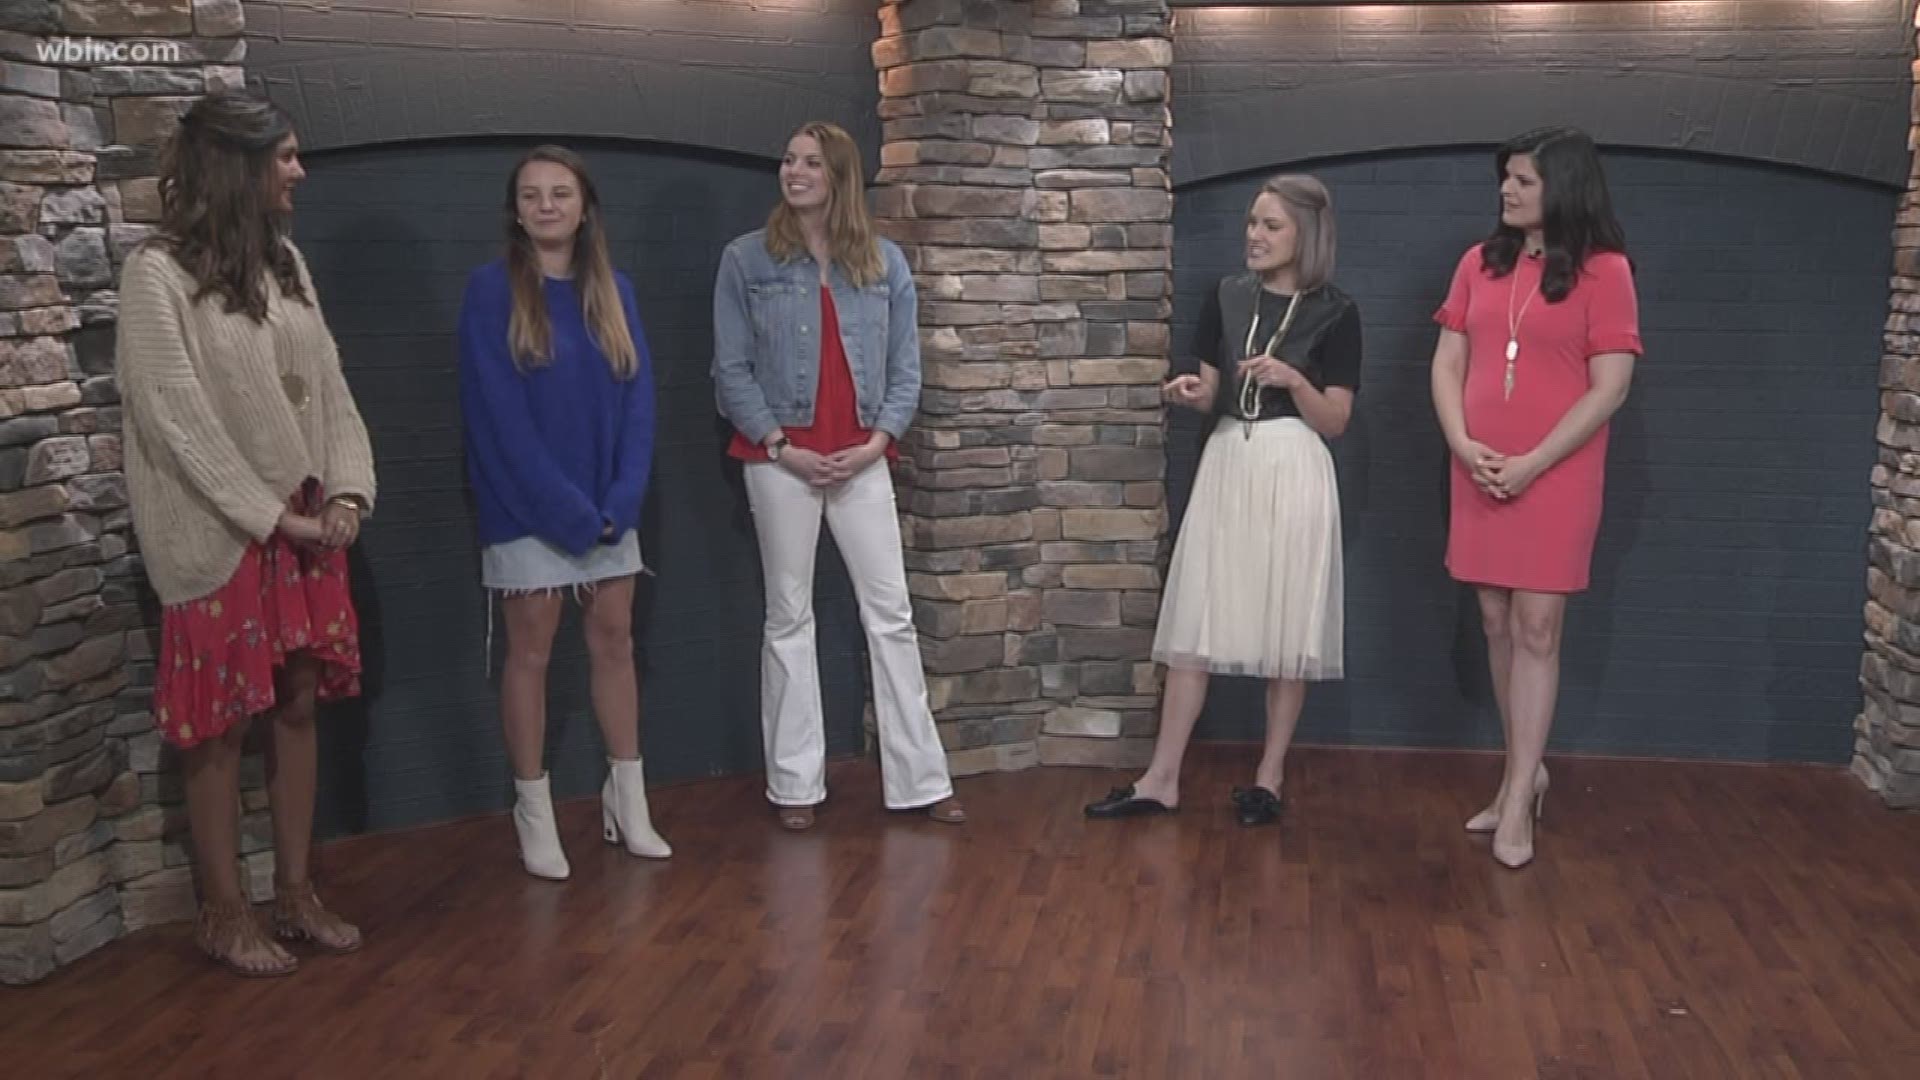 Michelle Childs shows us how we can transition our wardrobes from cooler to warmer temperatures.